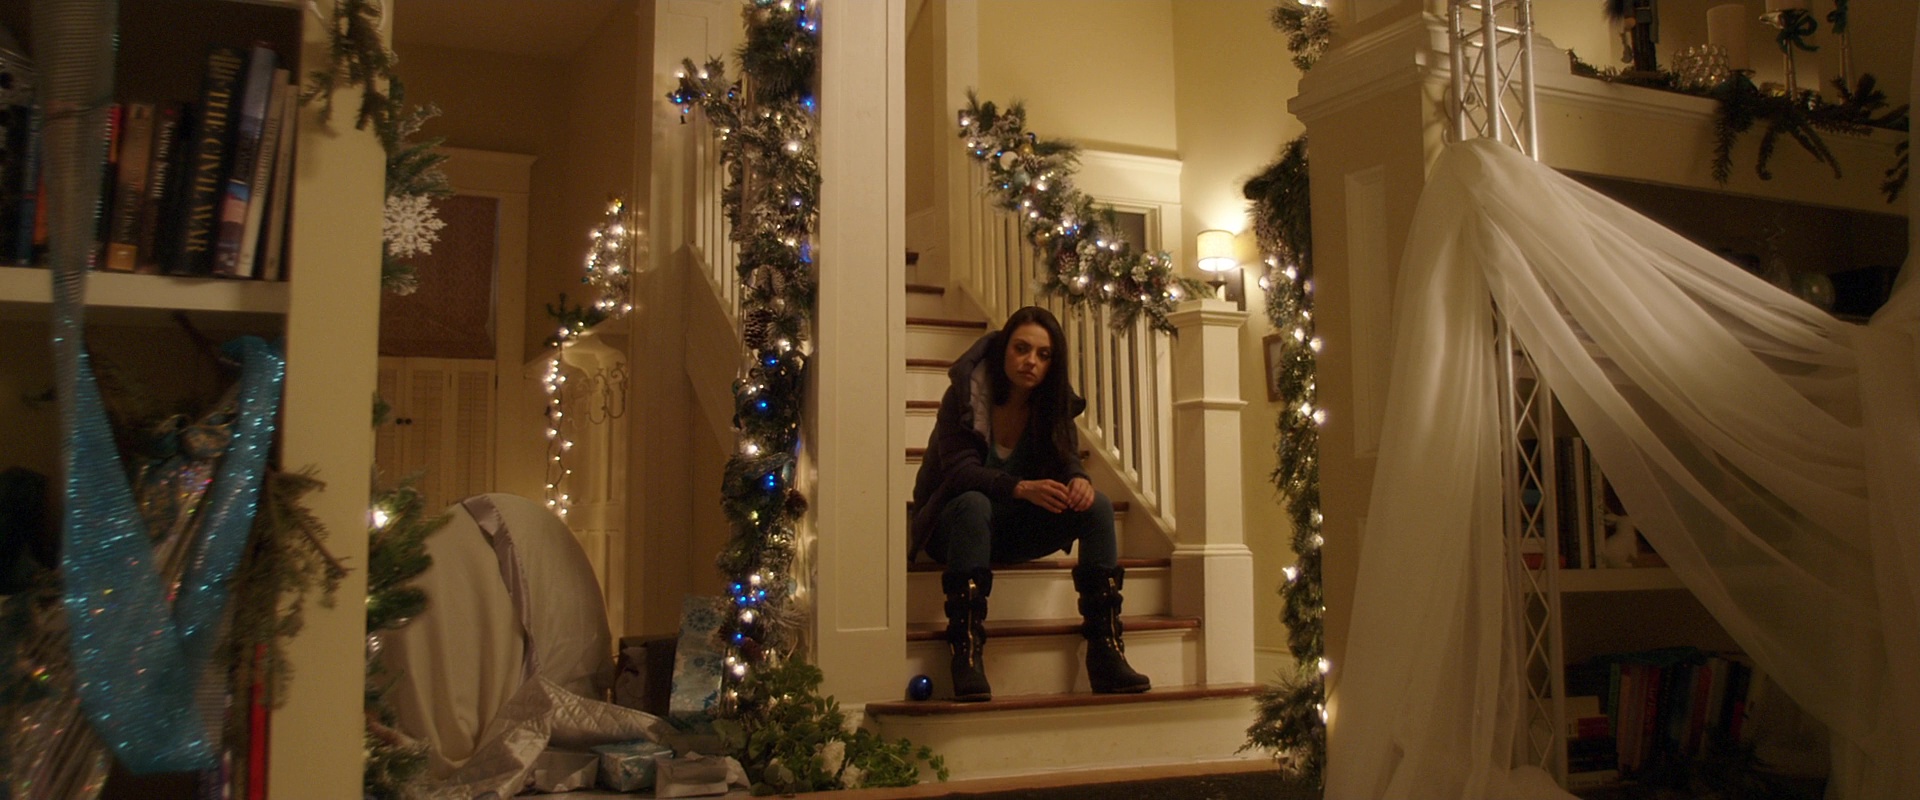 Sorel Women's Helen Wedge Holiday Knee-High Boots Worn by Mila Kunis in A Bad Moms ...1920 x 800